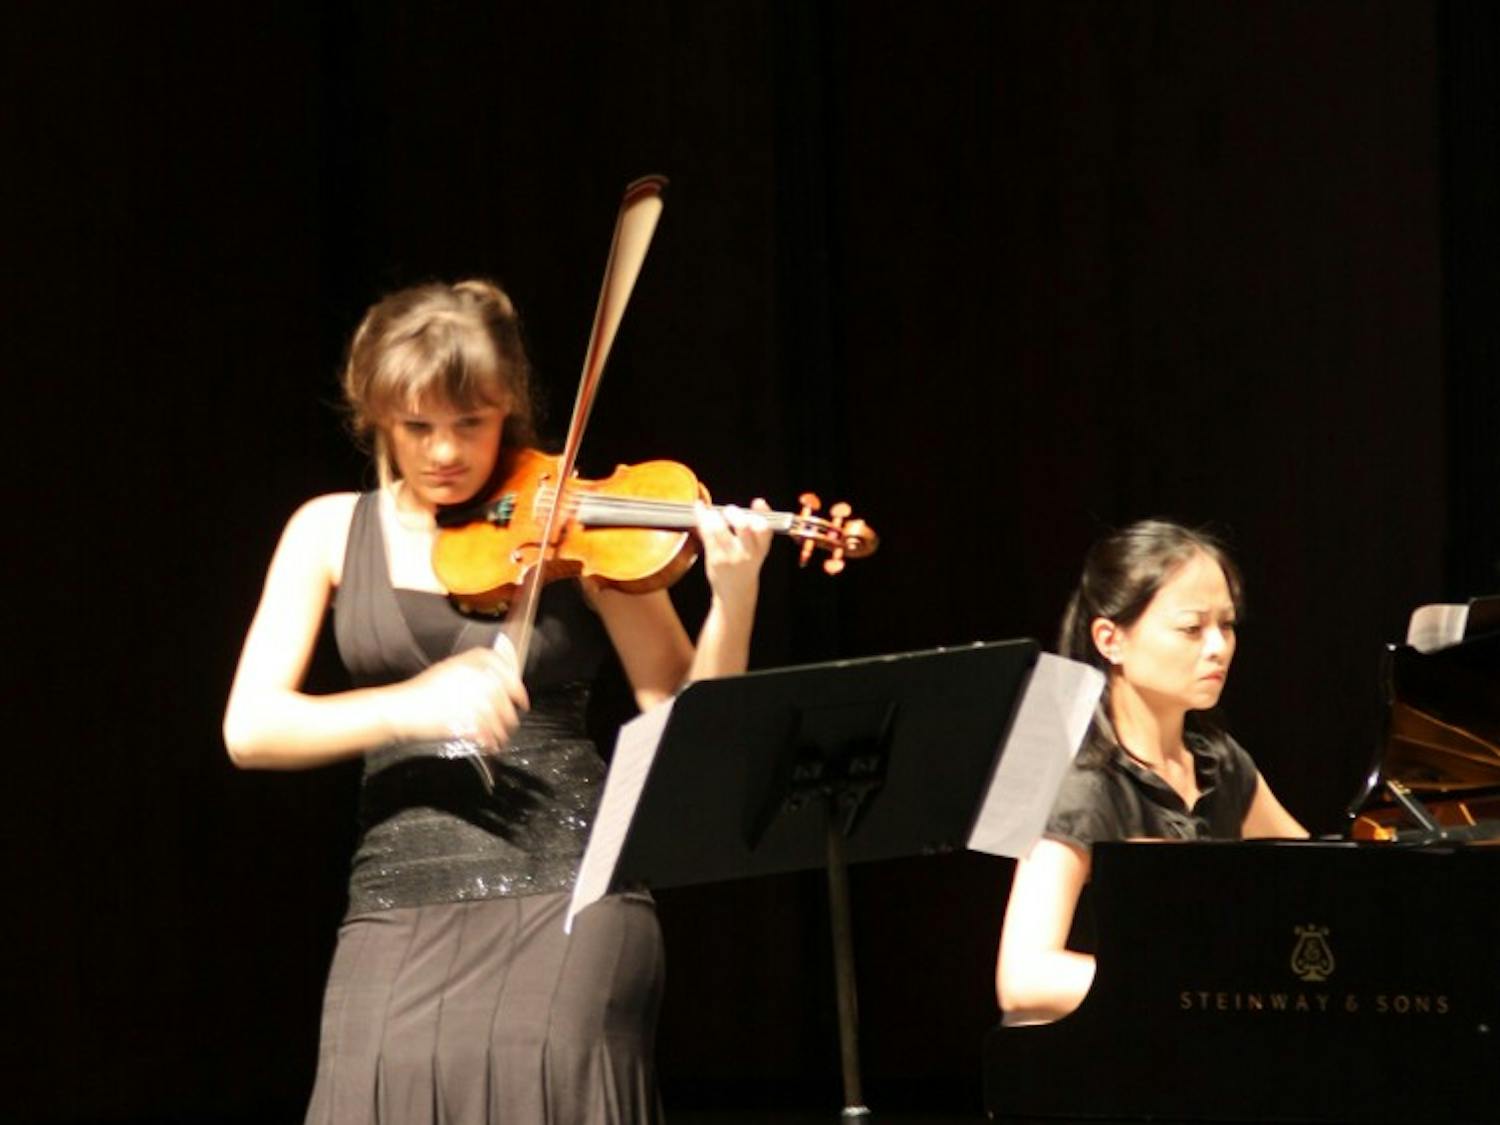 Nicola Benedetti performed with Pei-Yao Wang at Memorial Hall this evening.